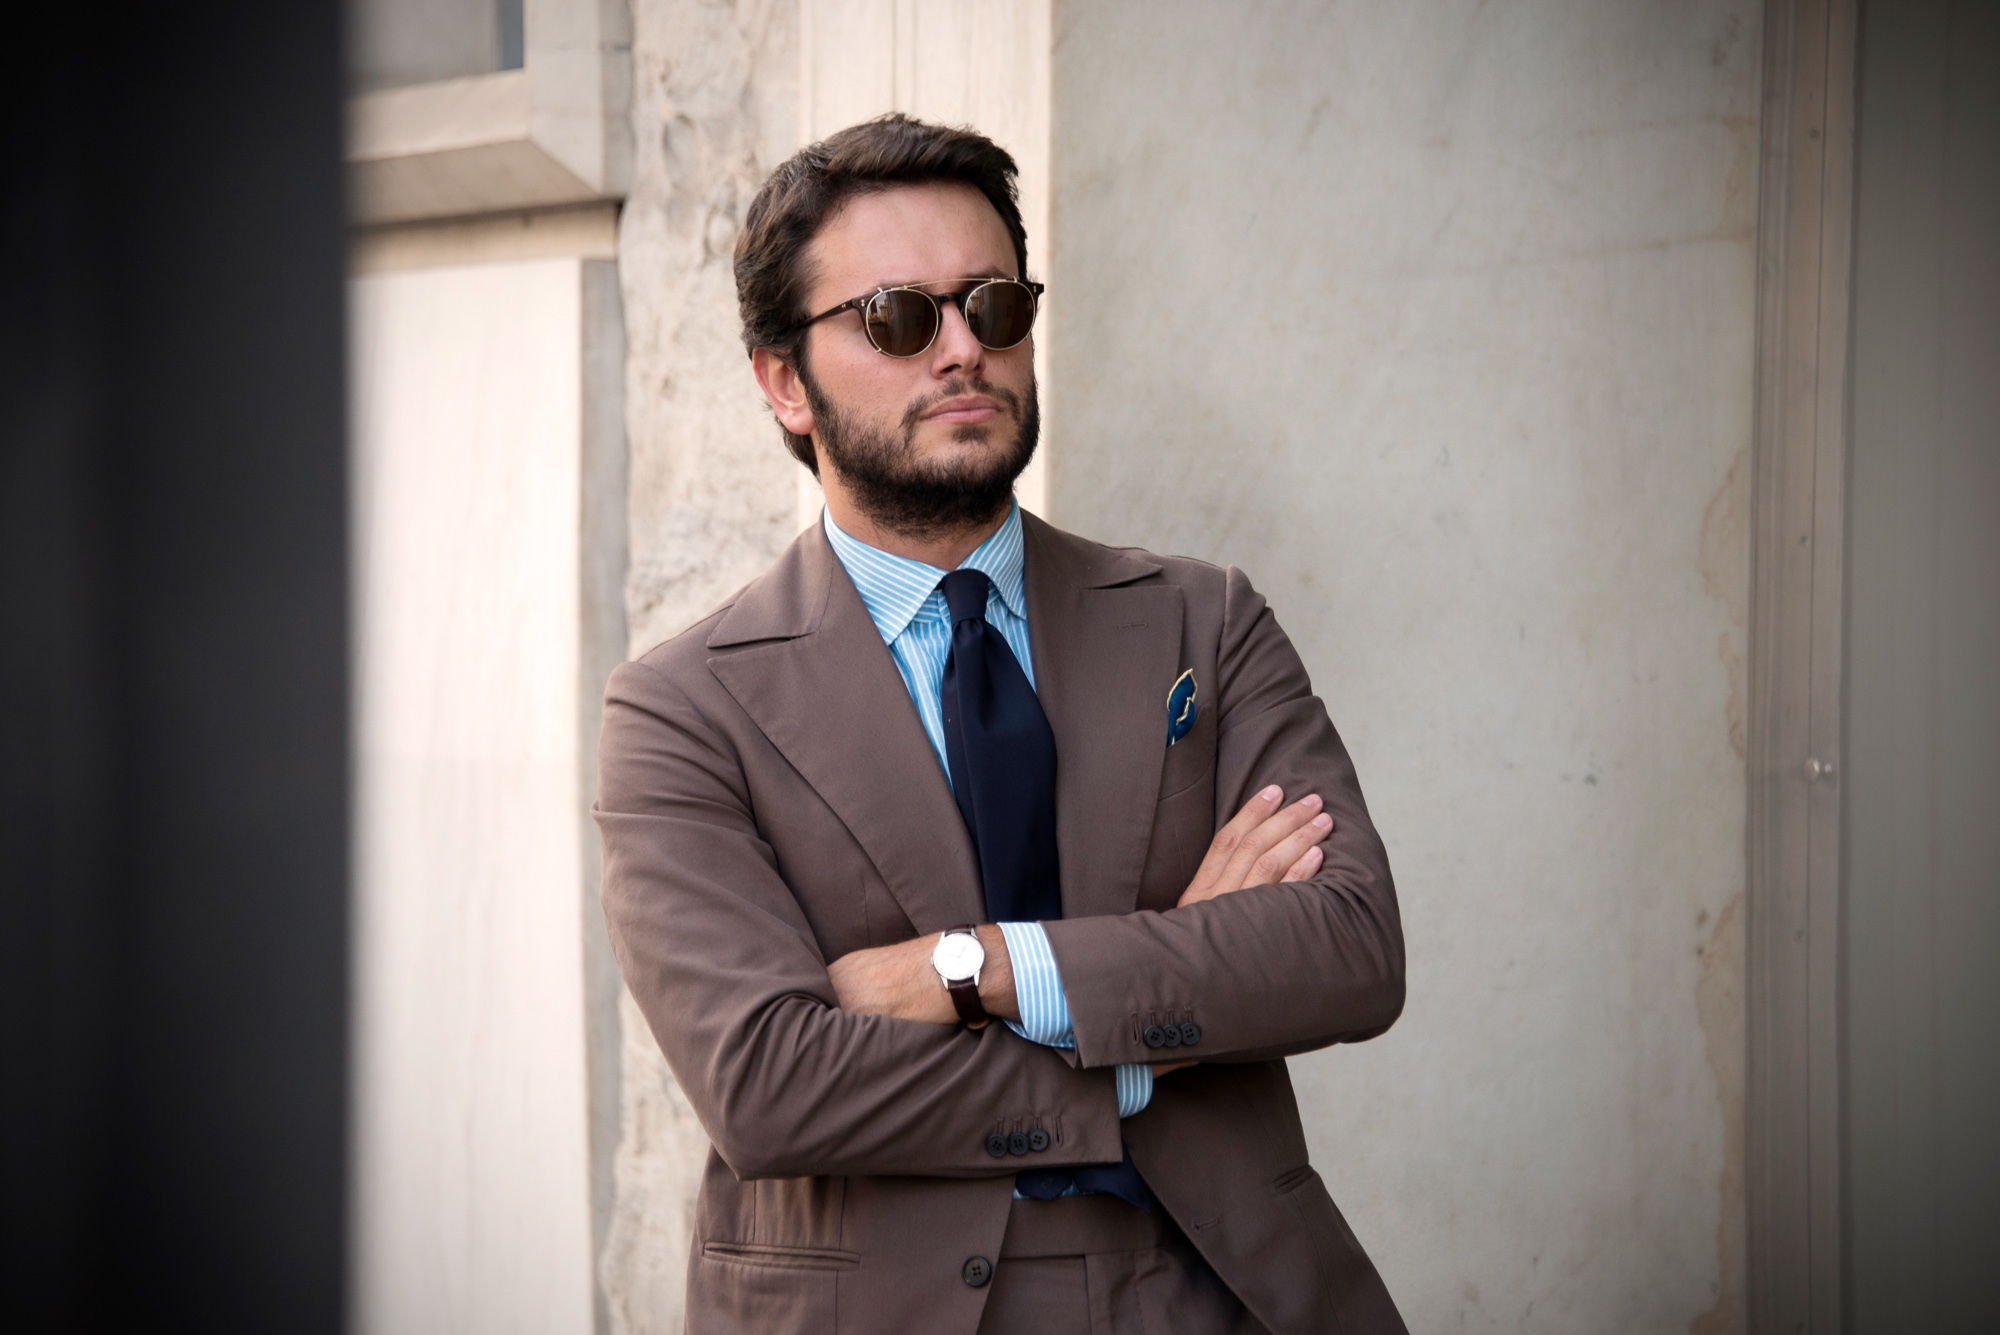 Edesim Cotton Gabardine  The idea for this suit came while watching a classic of Italian cinema